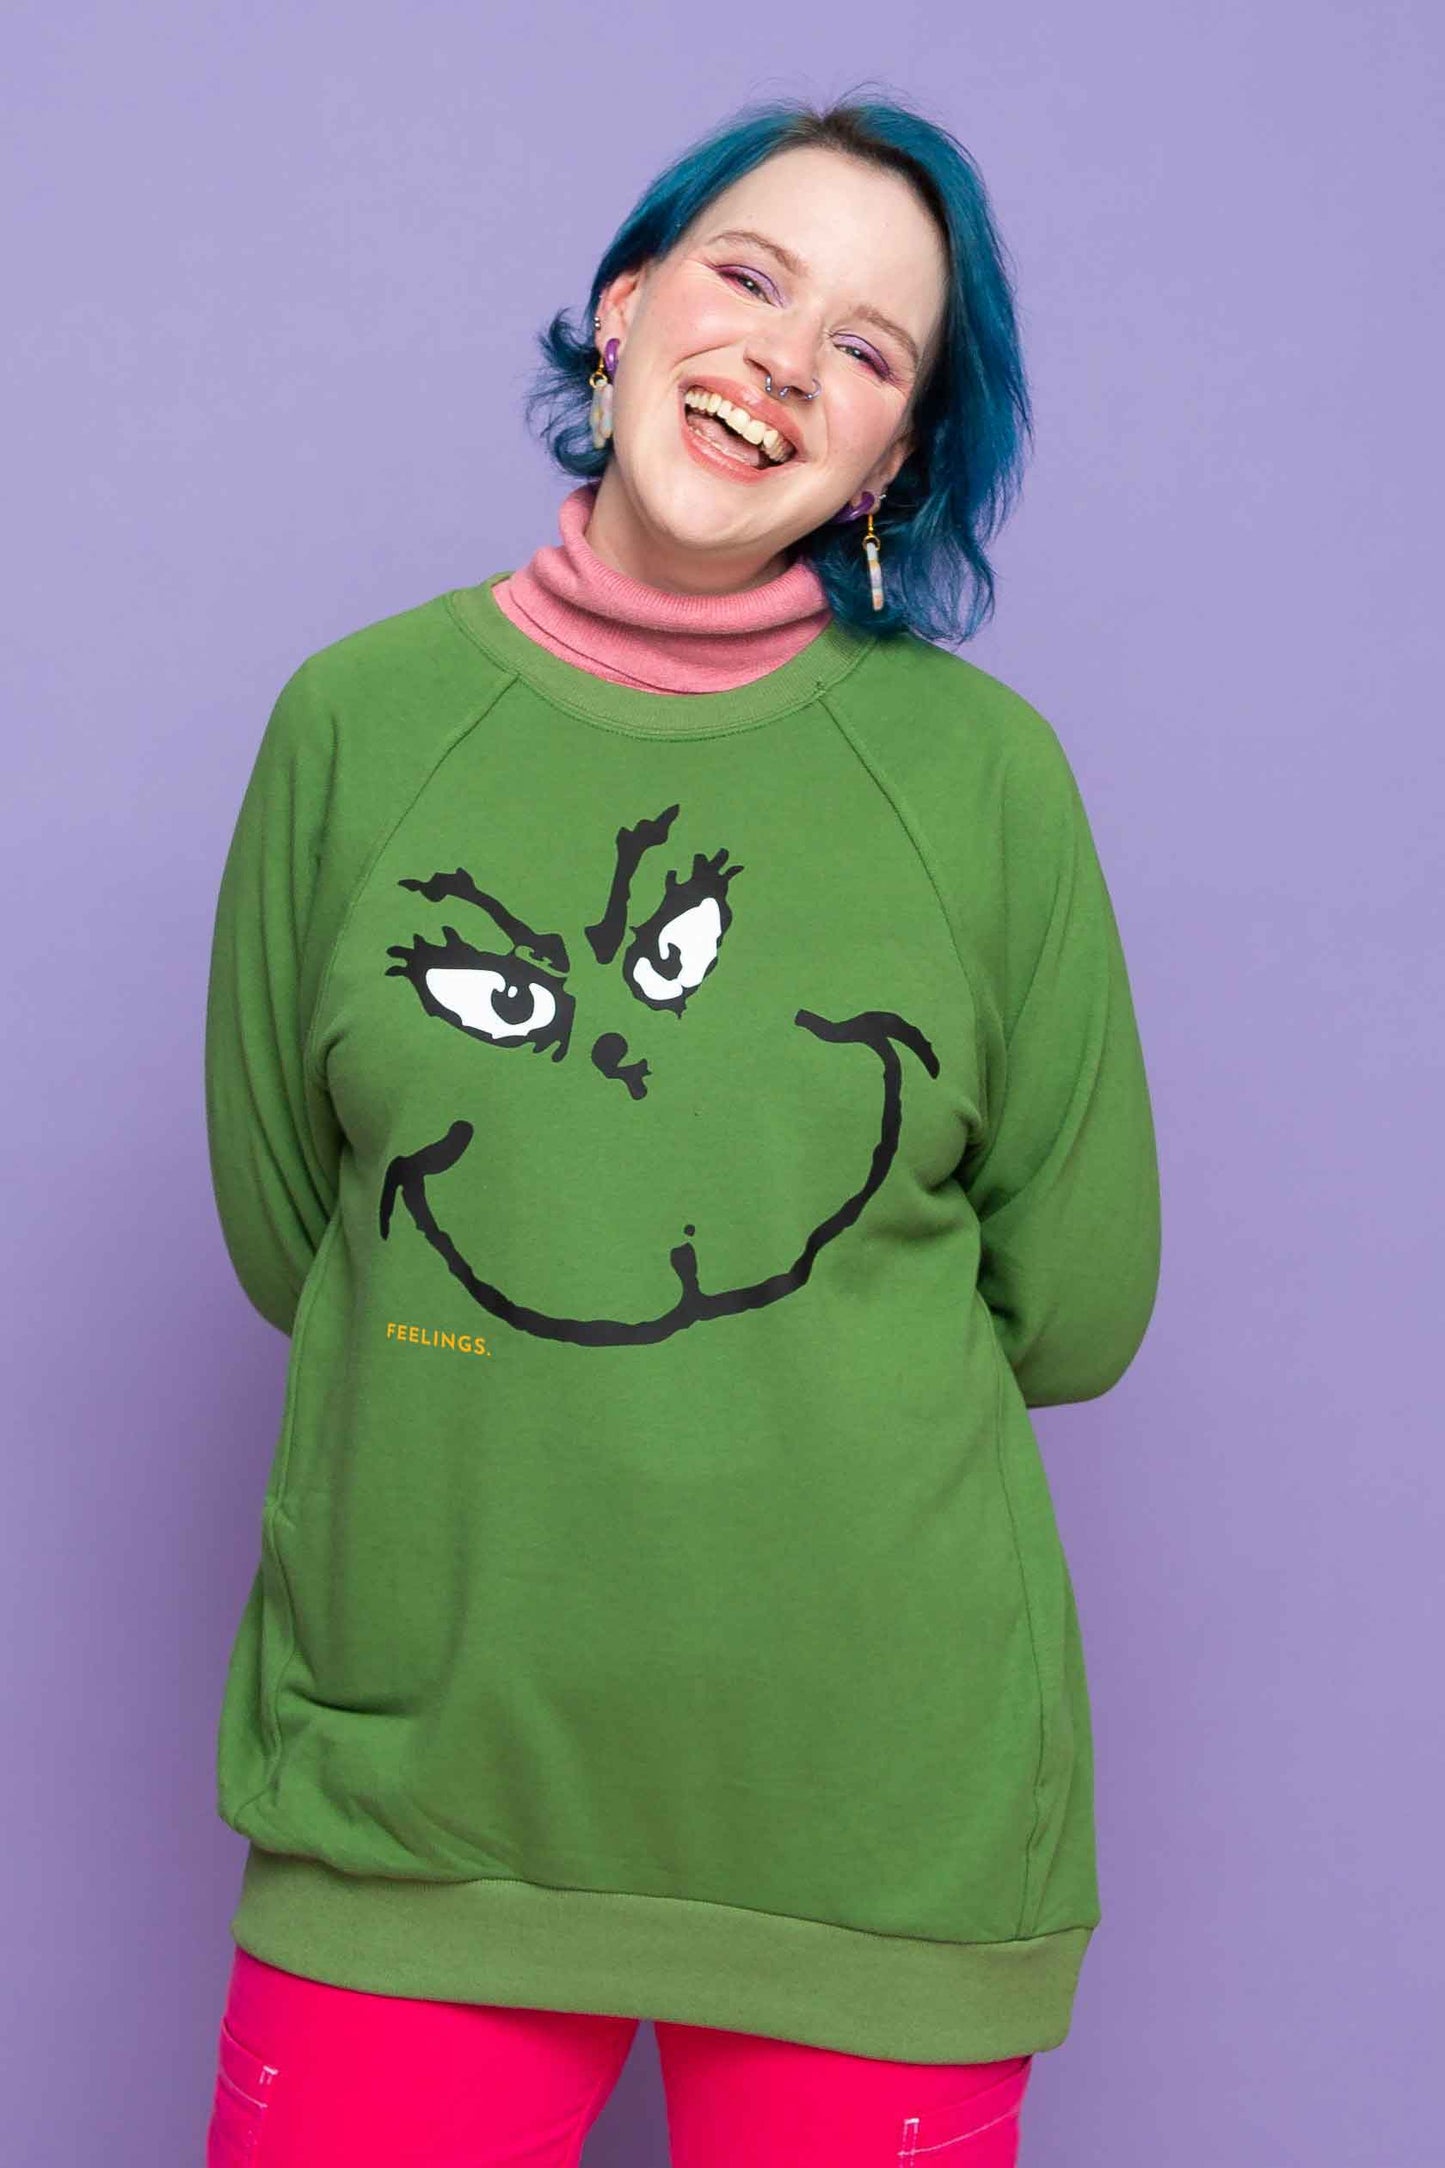 This is The Remix Sweatshirt FEELINGS (Inspired by THE GRINCH) - Oversized Vintage Christmas Sweatshirt in Green